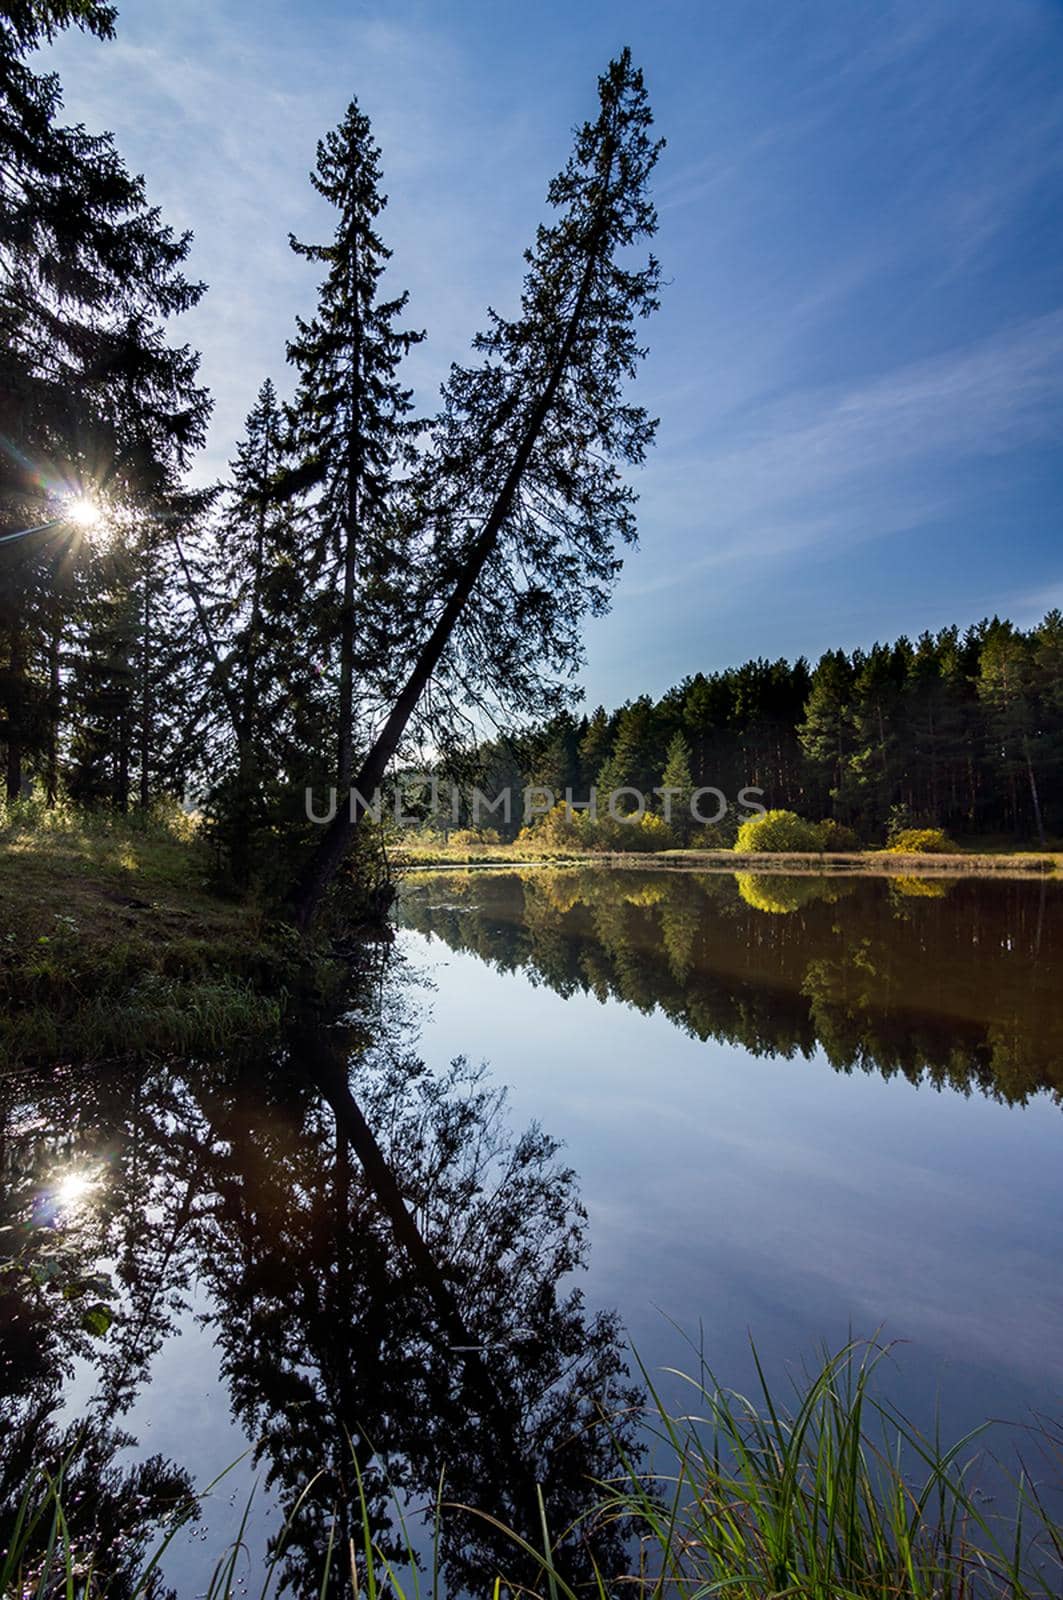 Beautiful blue sky over the lake and coniferous forest.